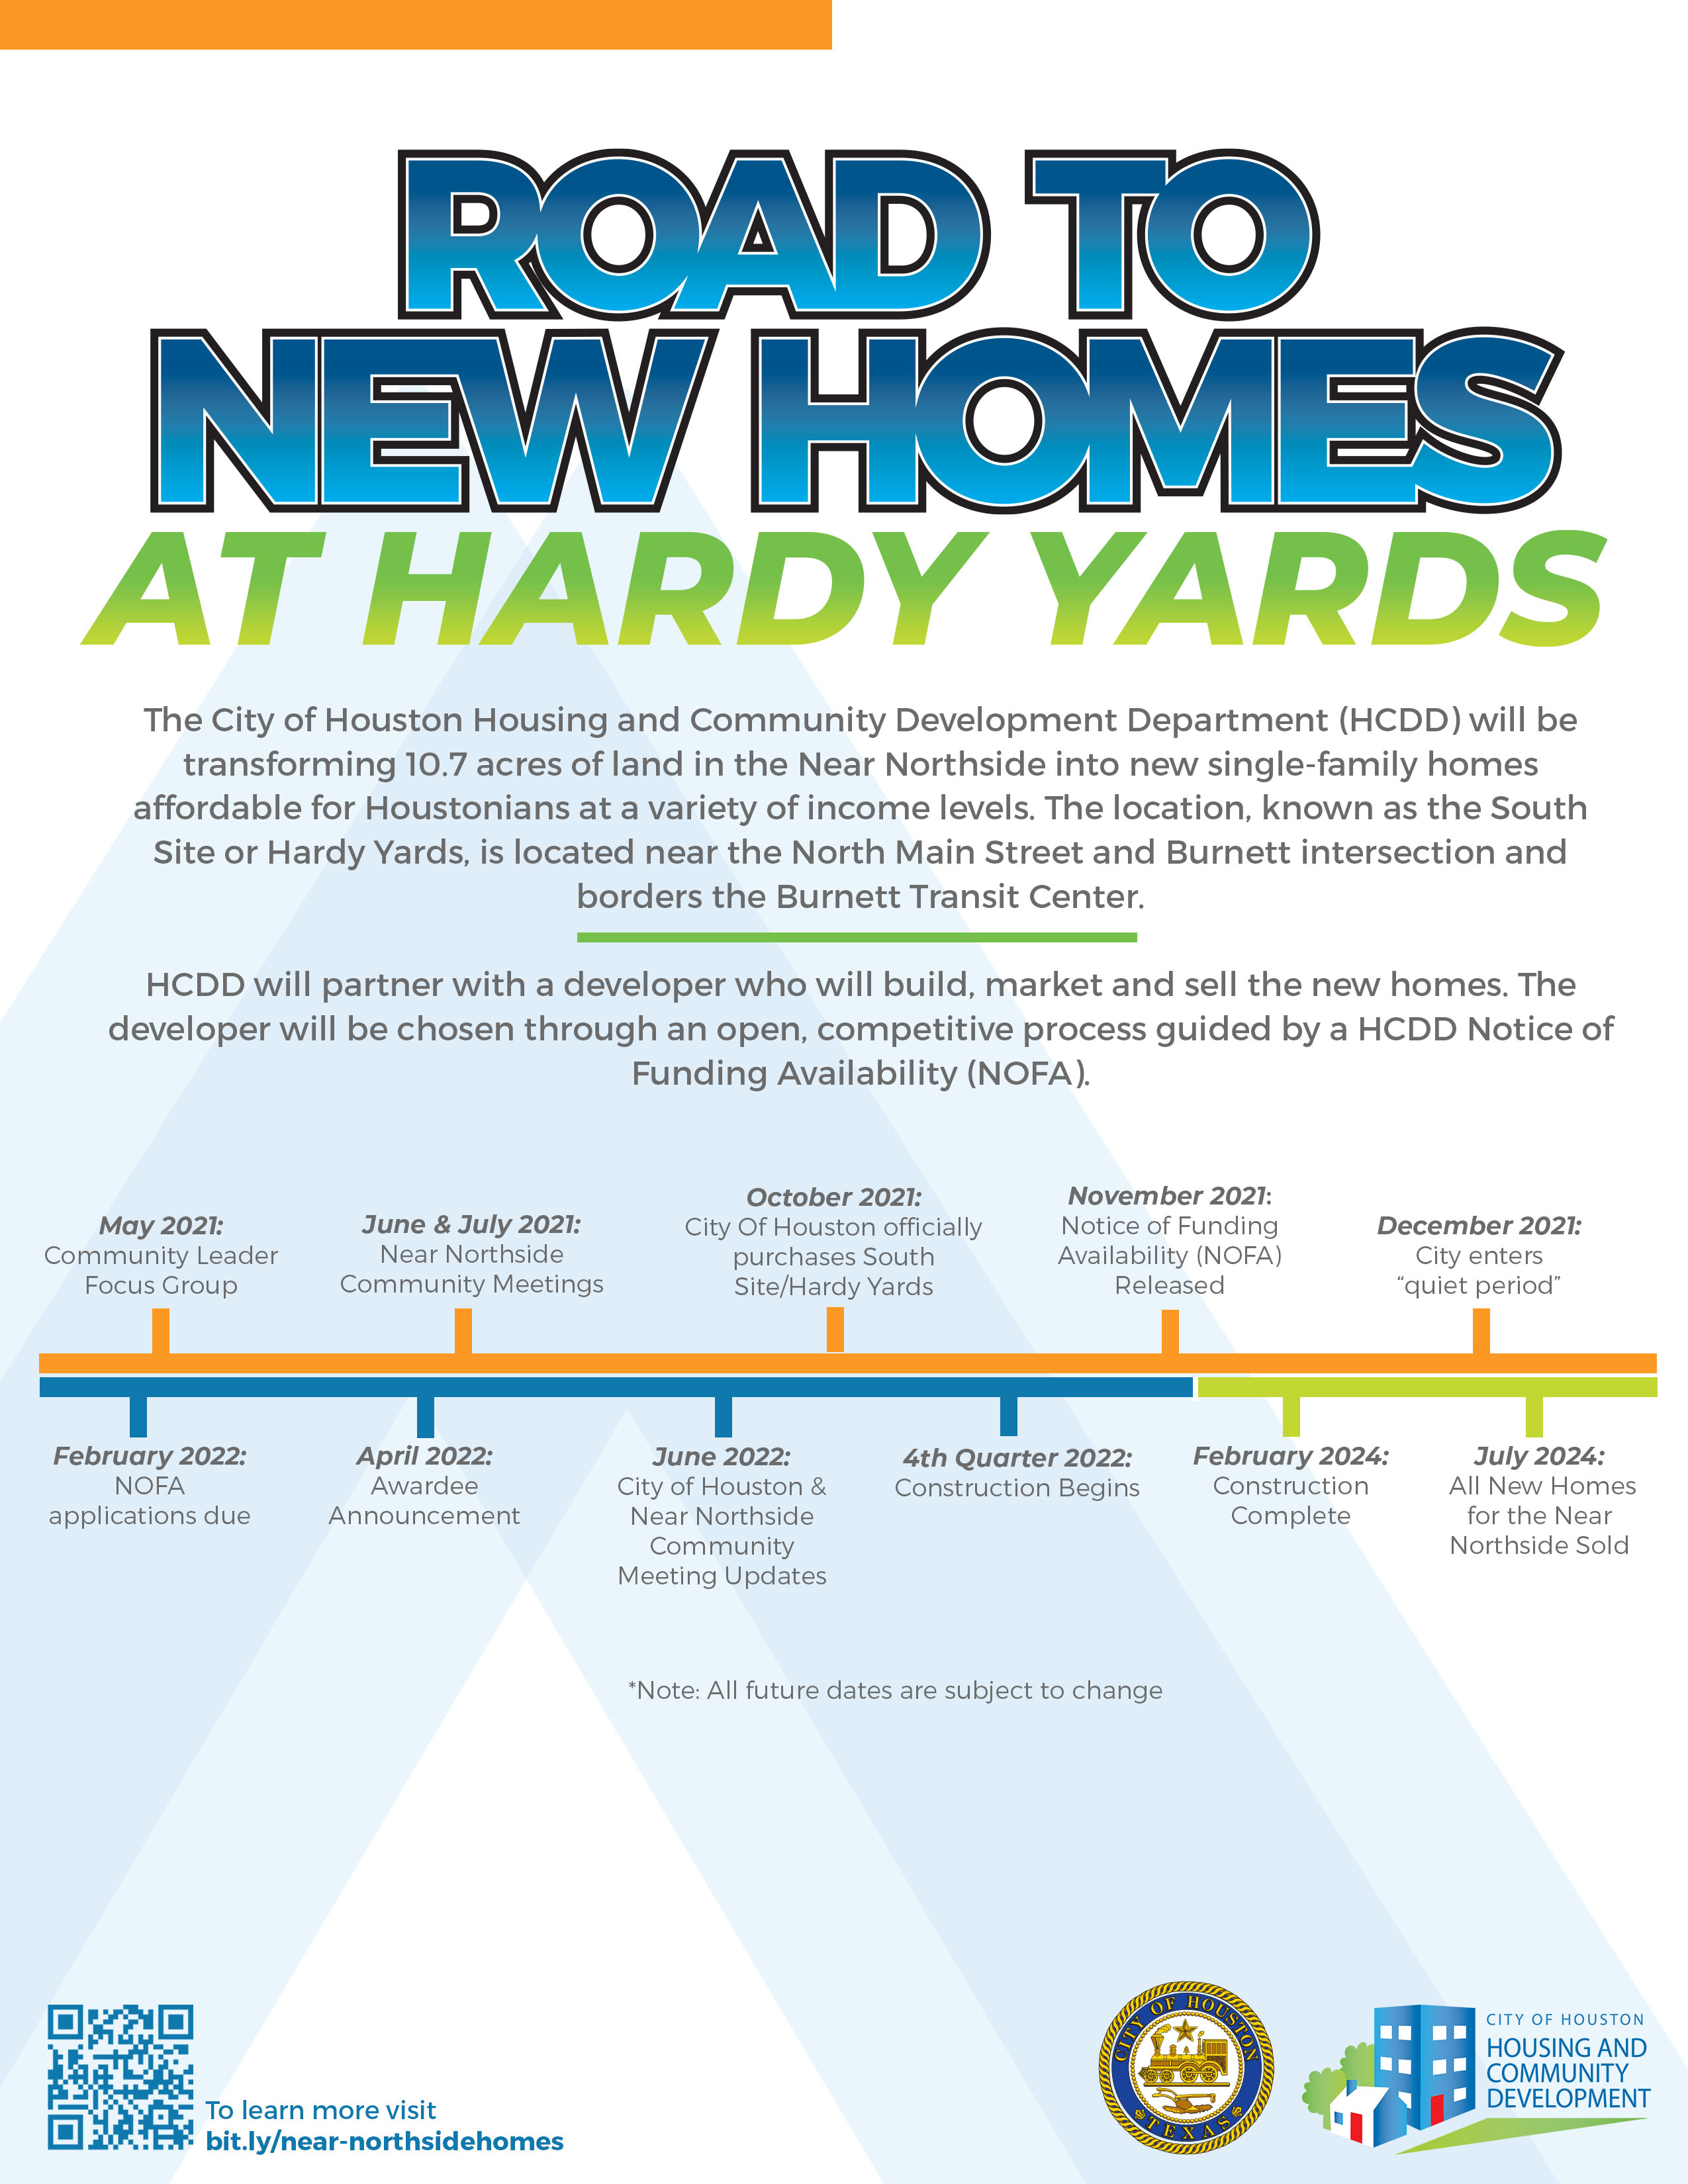 Road to New Homes at Hardy Yards